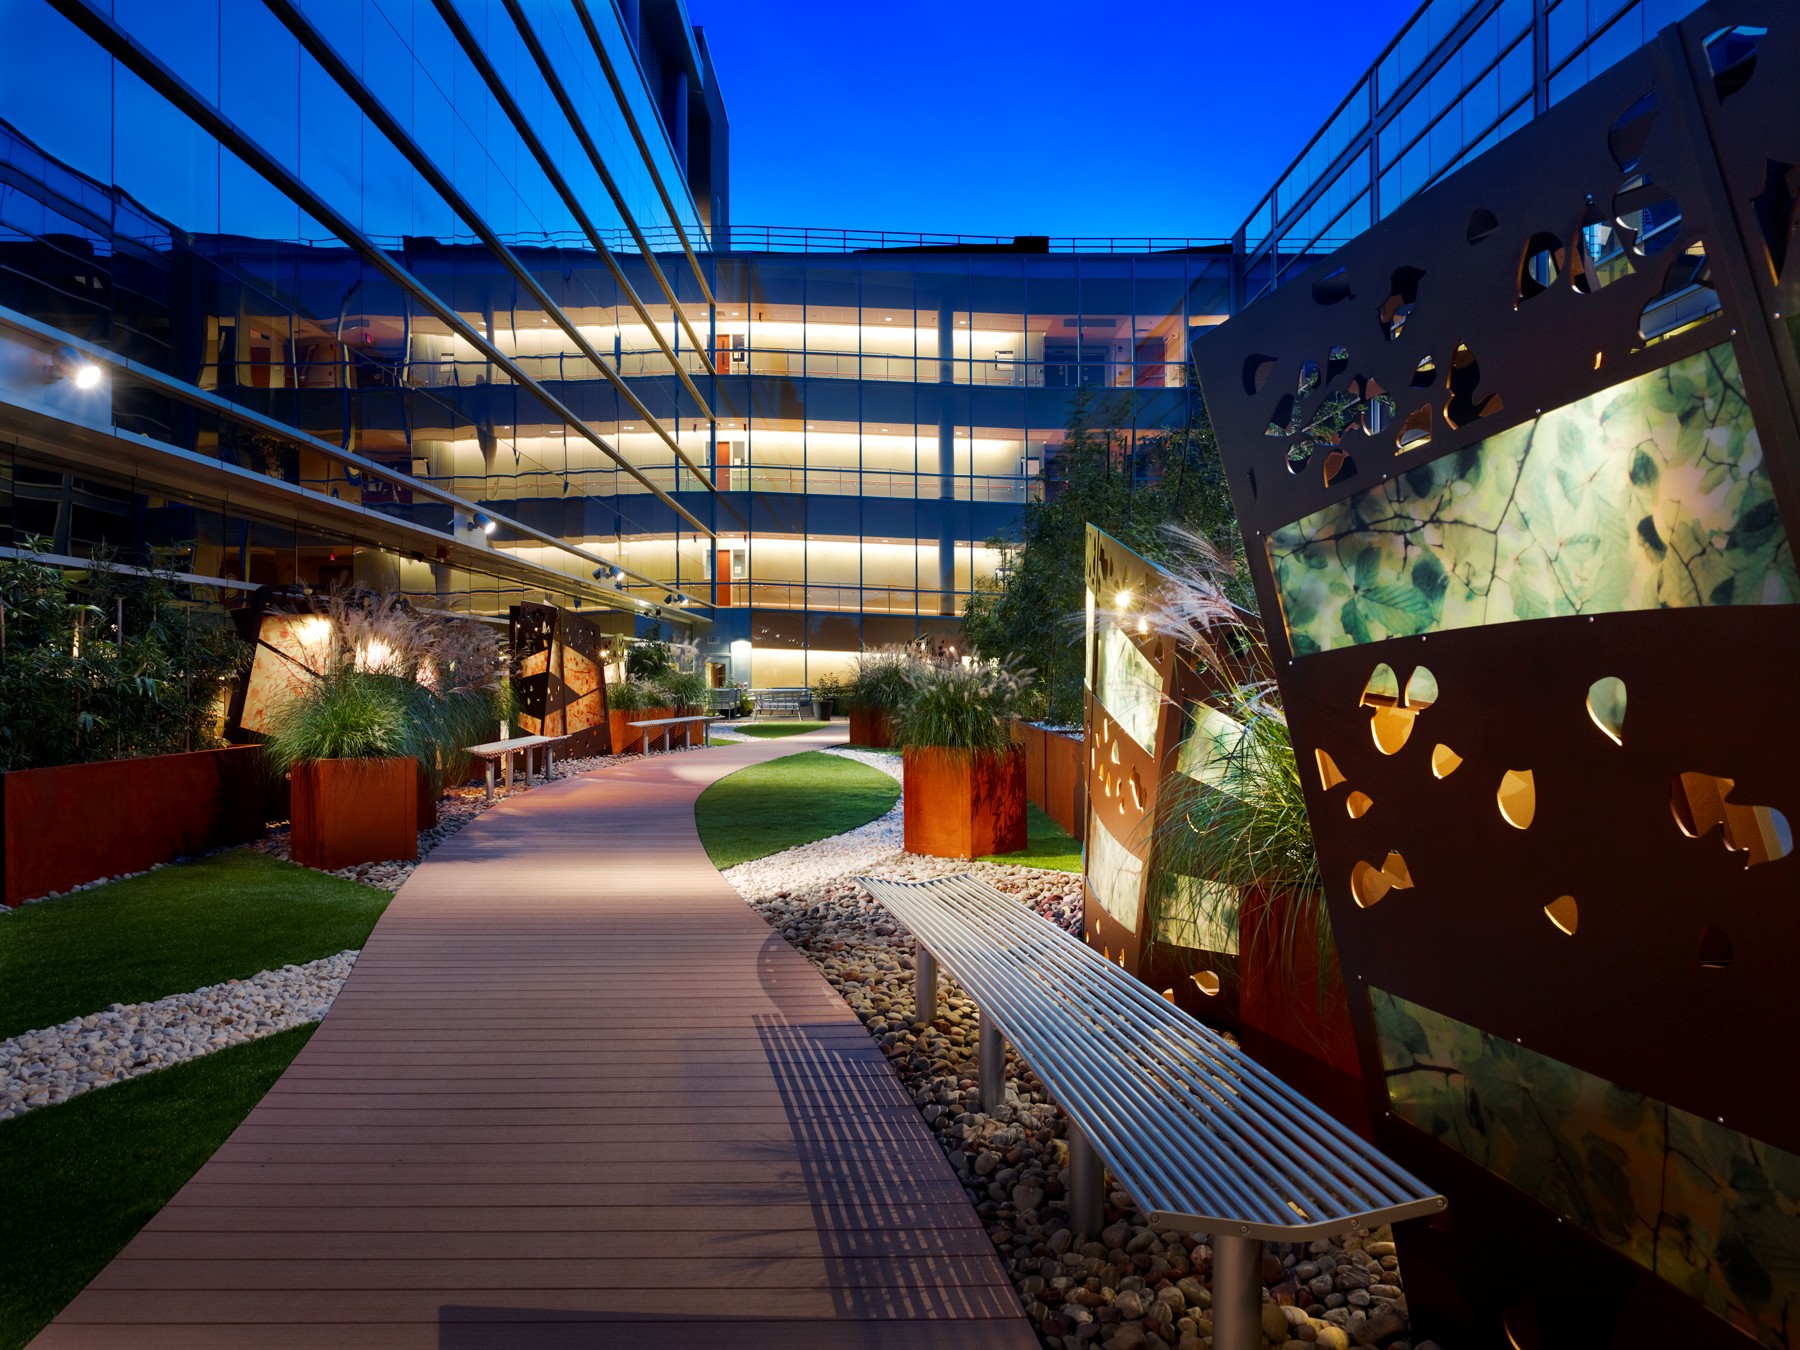 Designing wellness communities to focus on integrated healthcare—reducing costs naturally